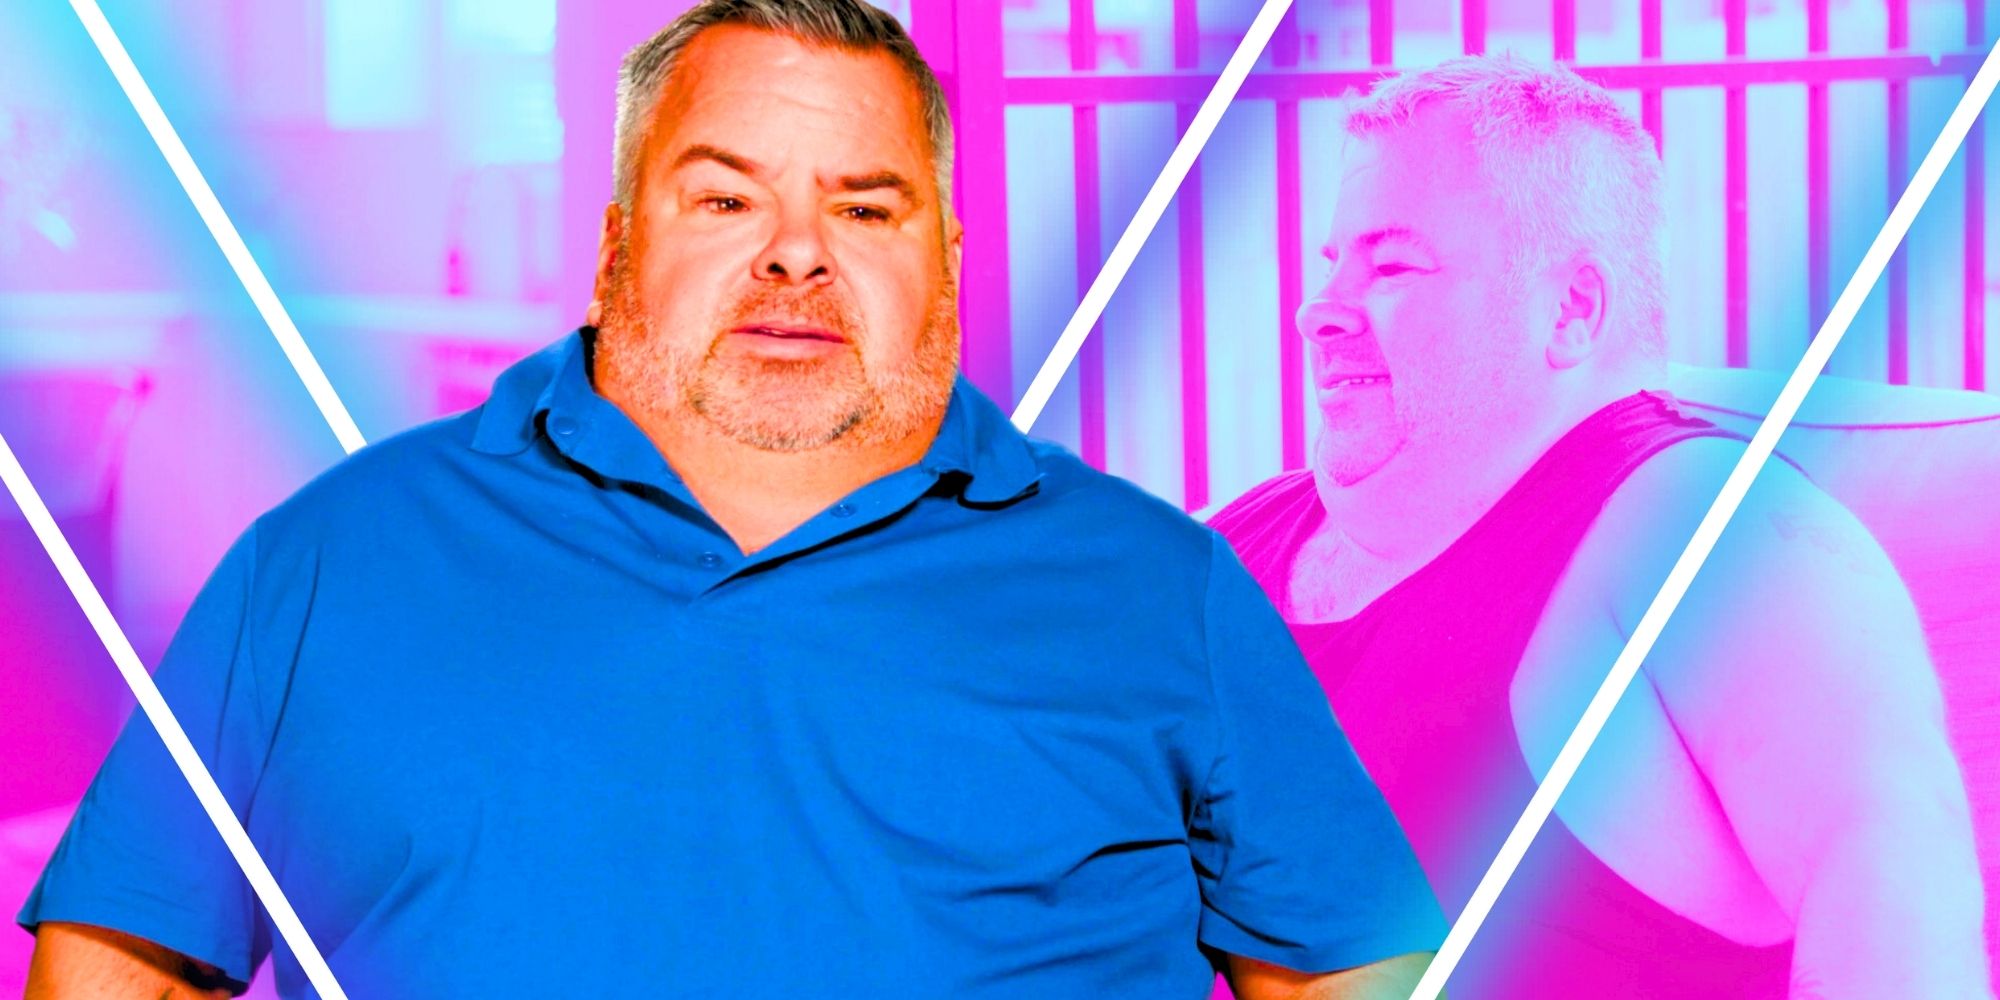 90 Day Fiance's Big Ed Brown wears a blue tank top while talking in the background in a montage image.